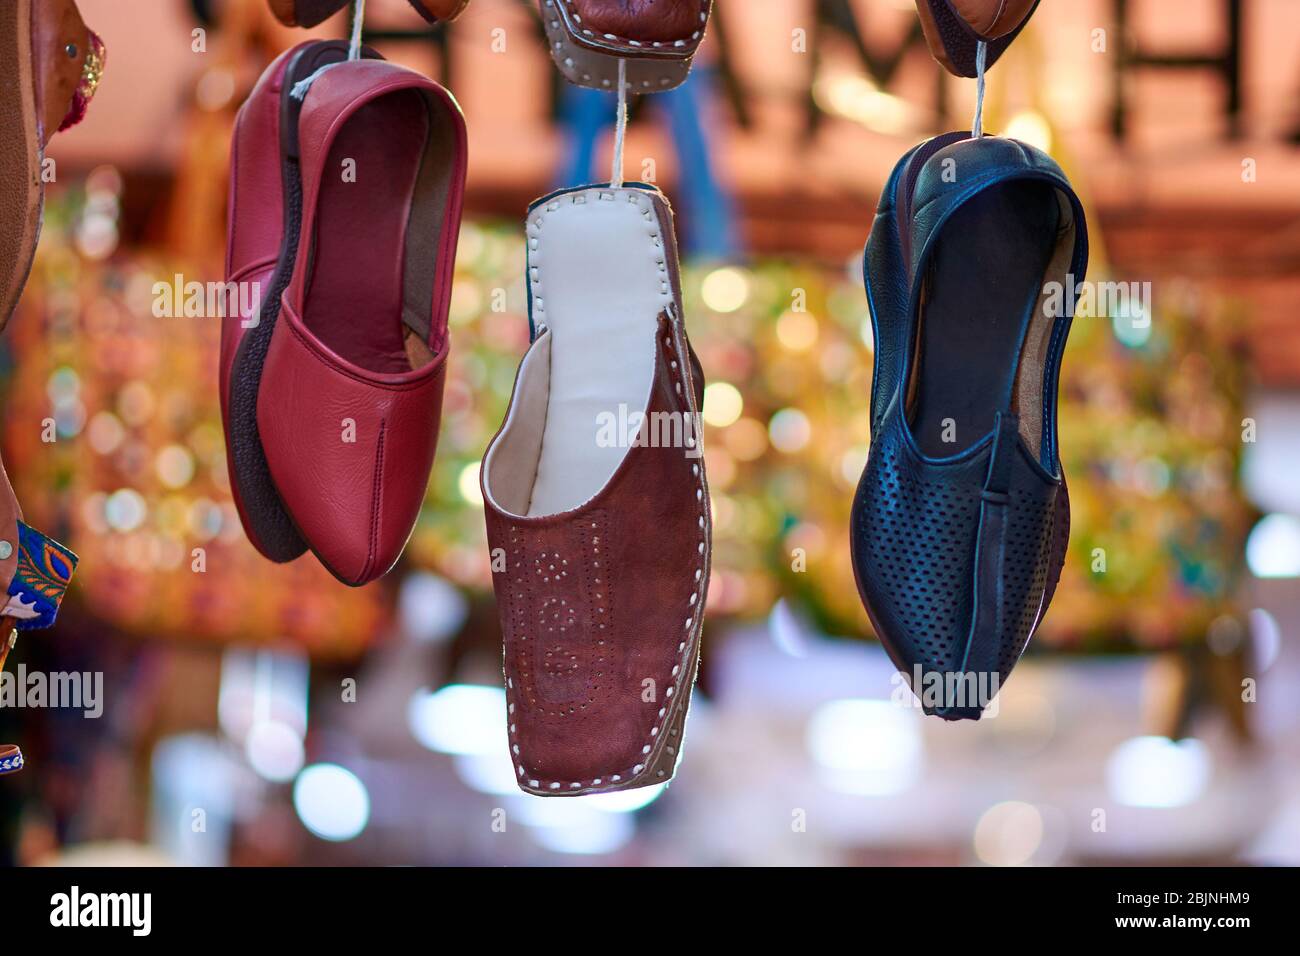 Footwear Market India Indian High Resolution Stock Photography and ...